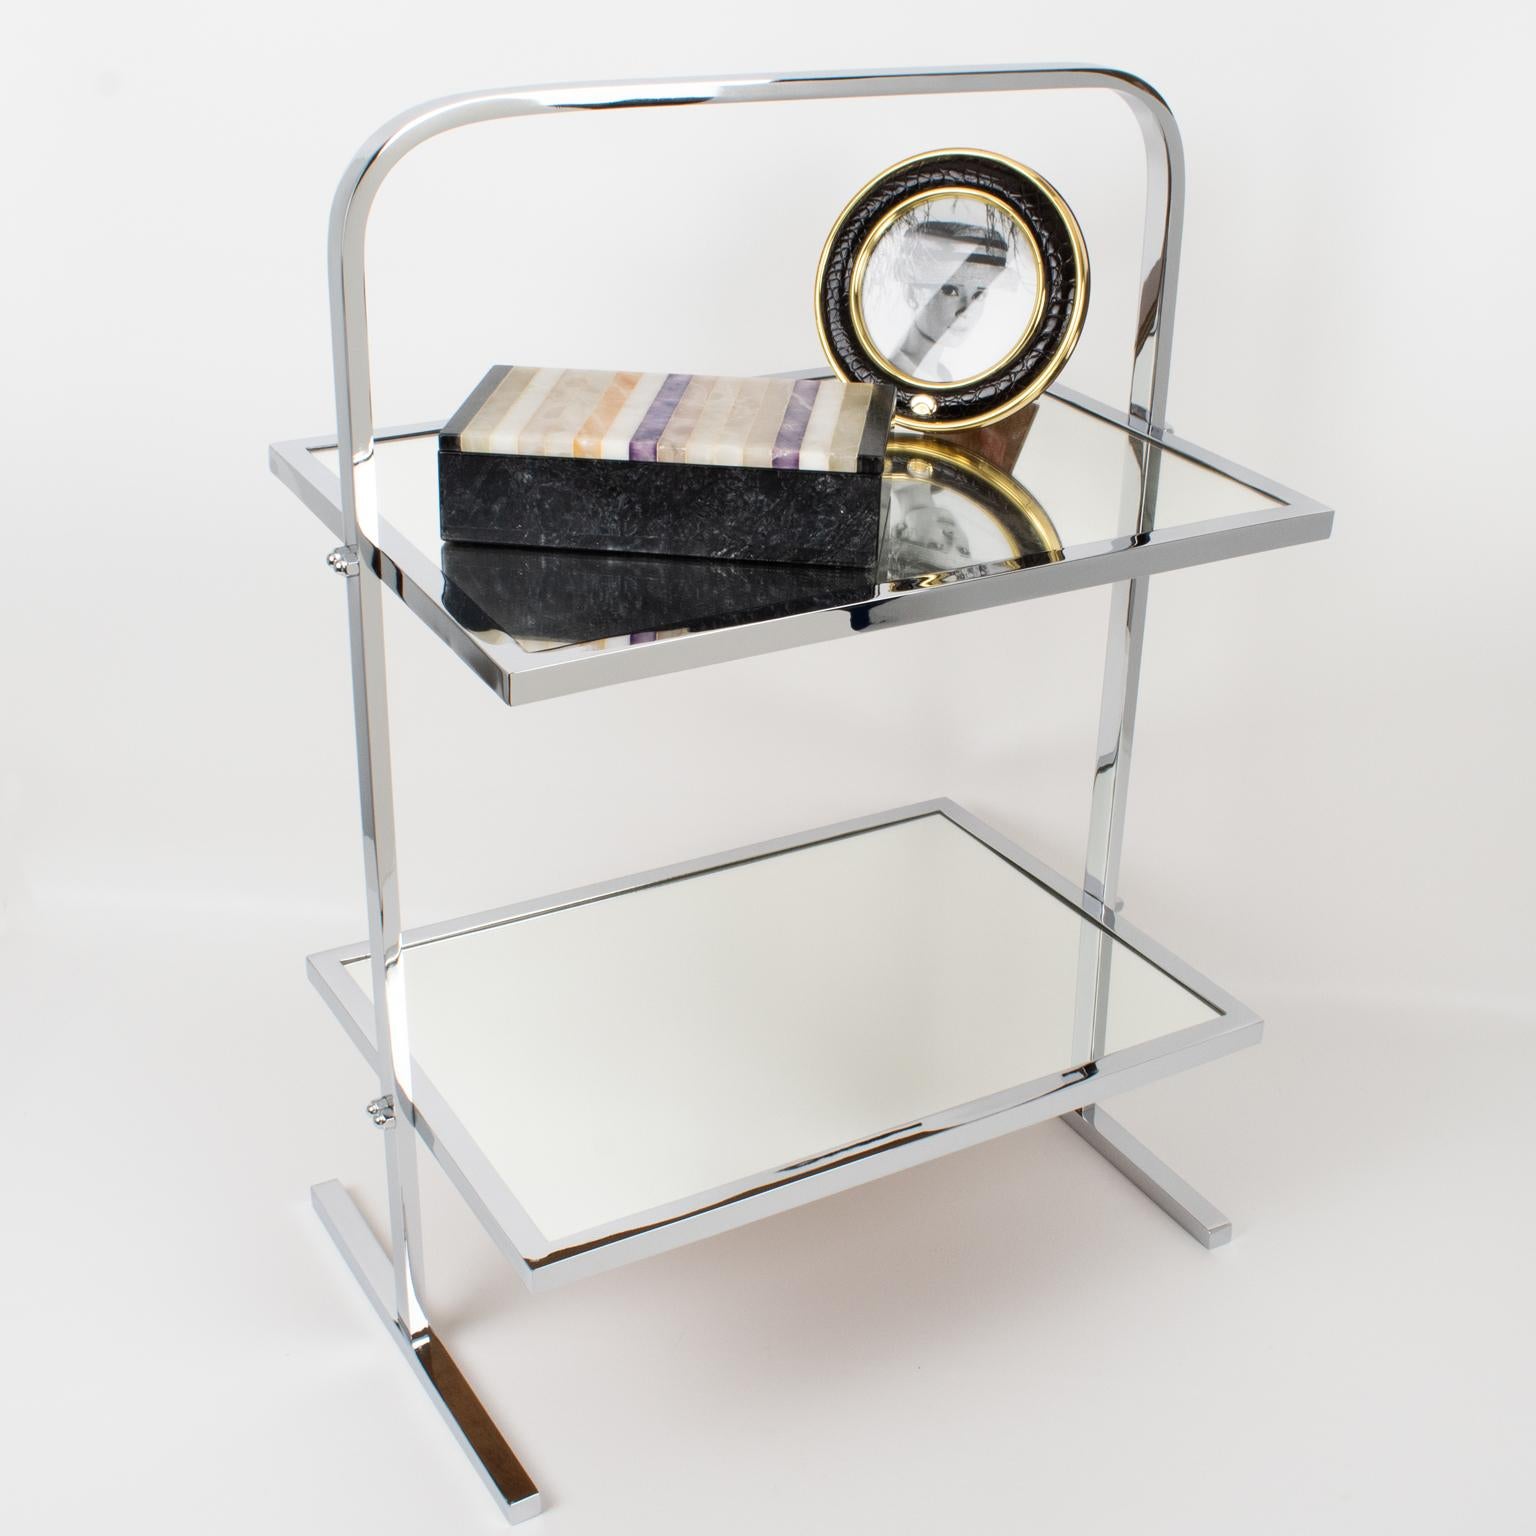 Mid-20th Century Jacques Adnet Art Deco Chrome and Mirror Side Coffee Table, France 1930s For Sale